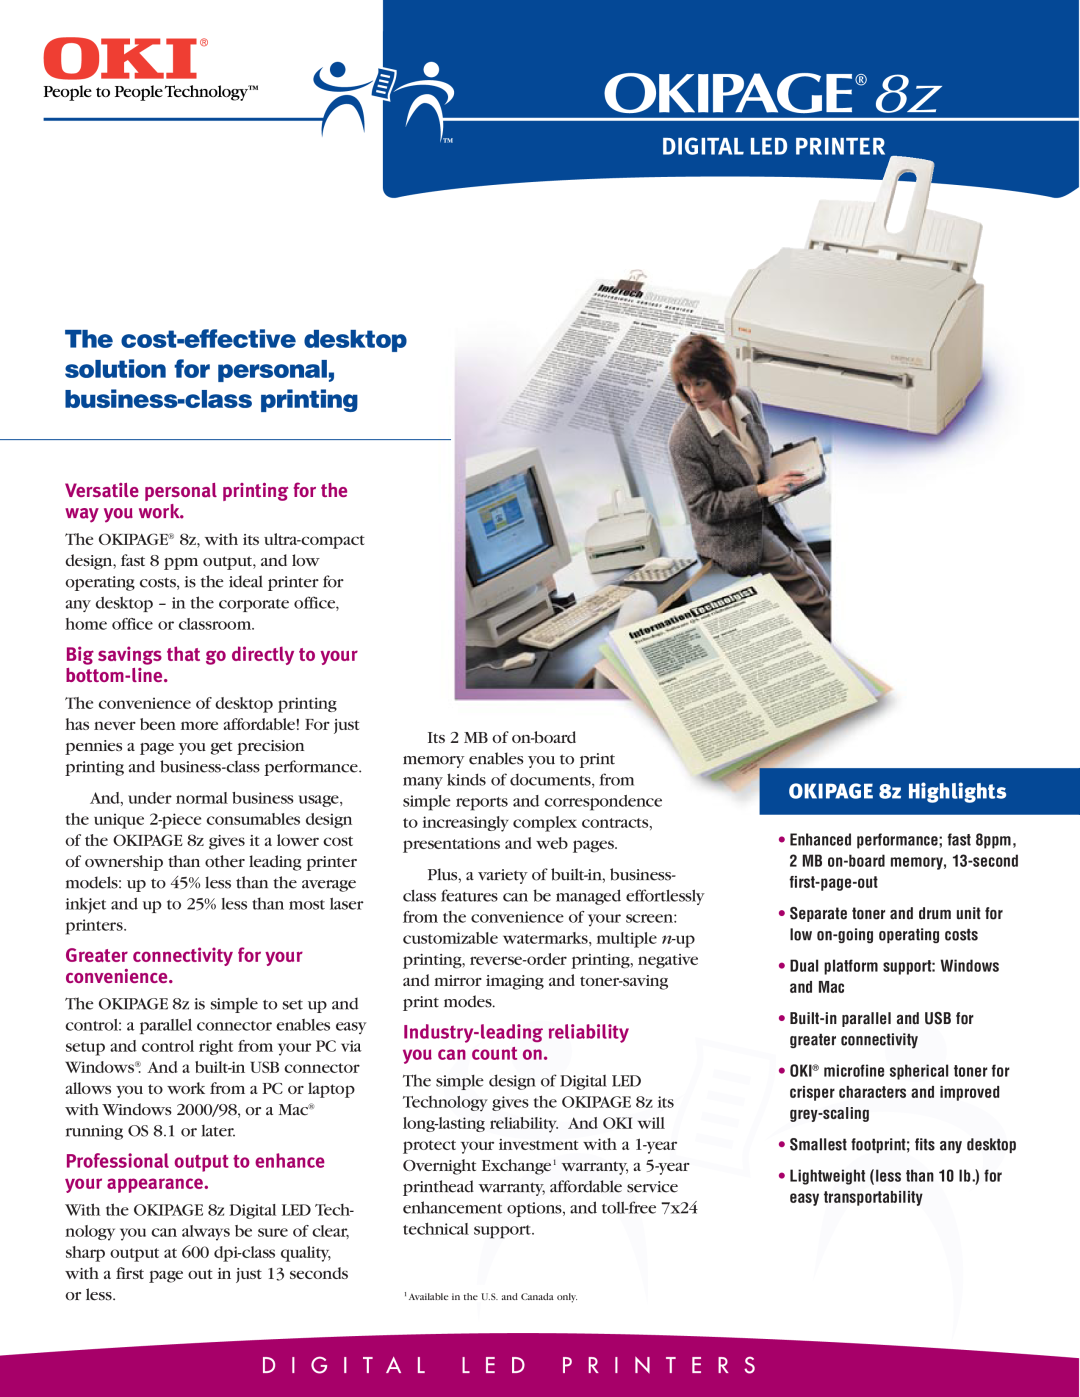 Oki warranty Digital Led Printer, OKIPAGE 8z Highlights, Versatile personal printing for the way you work 